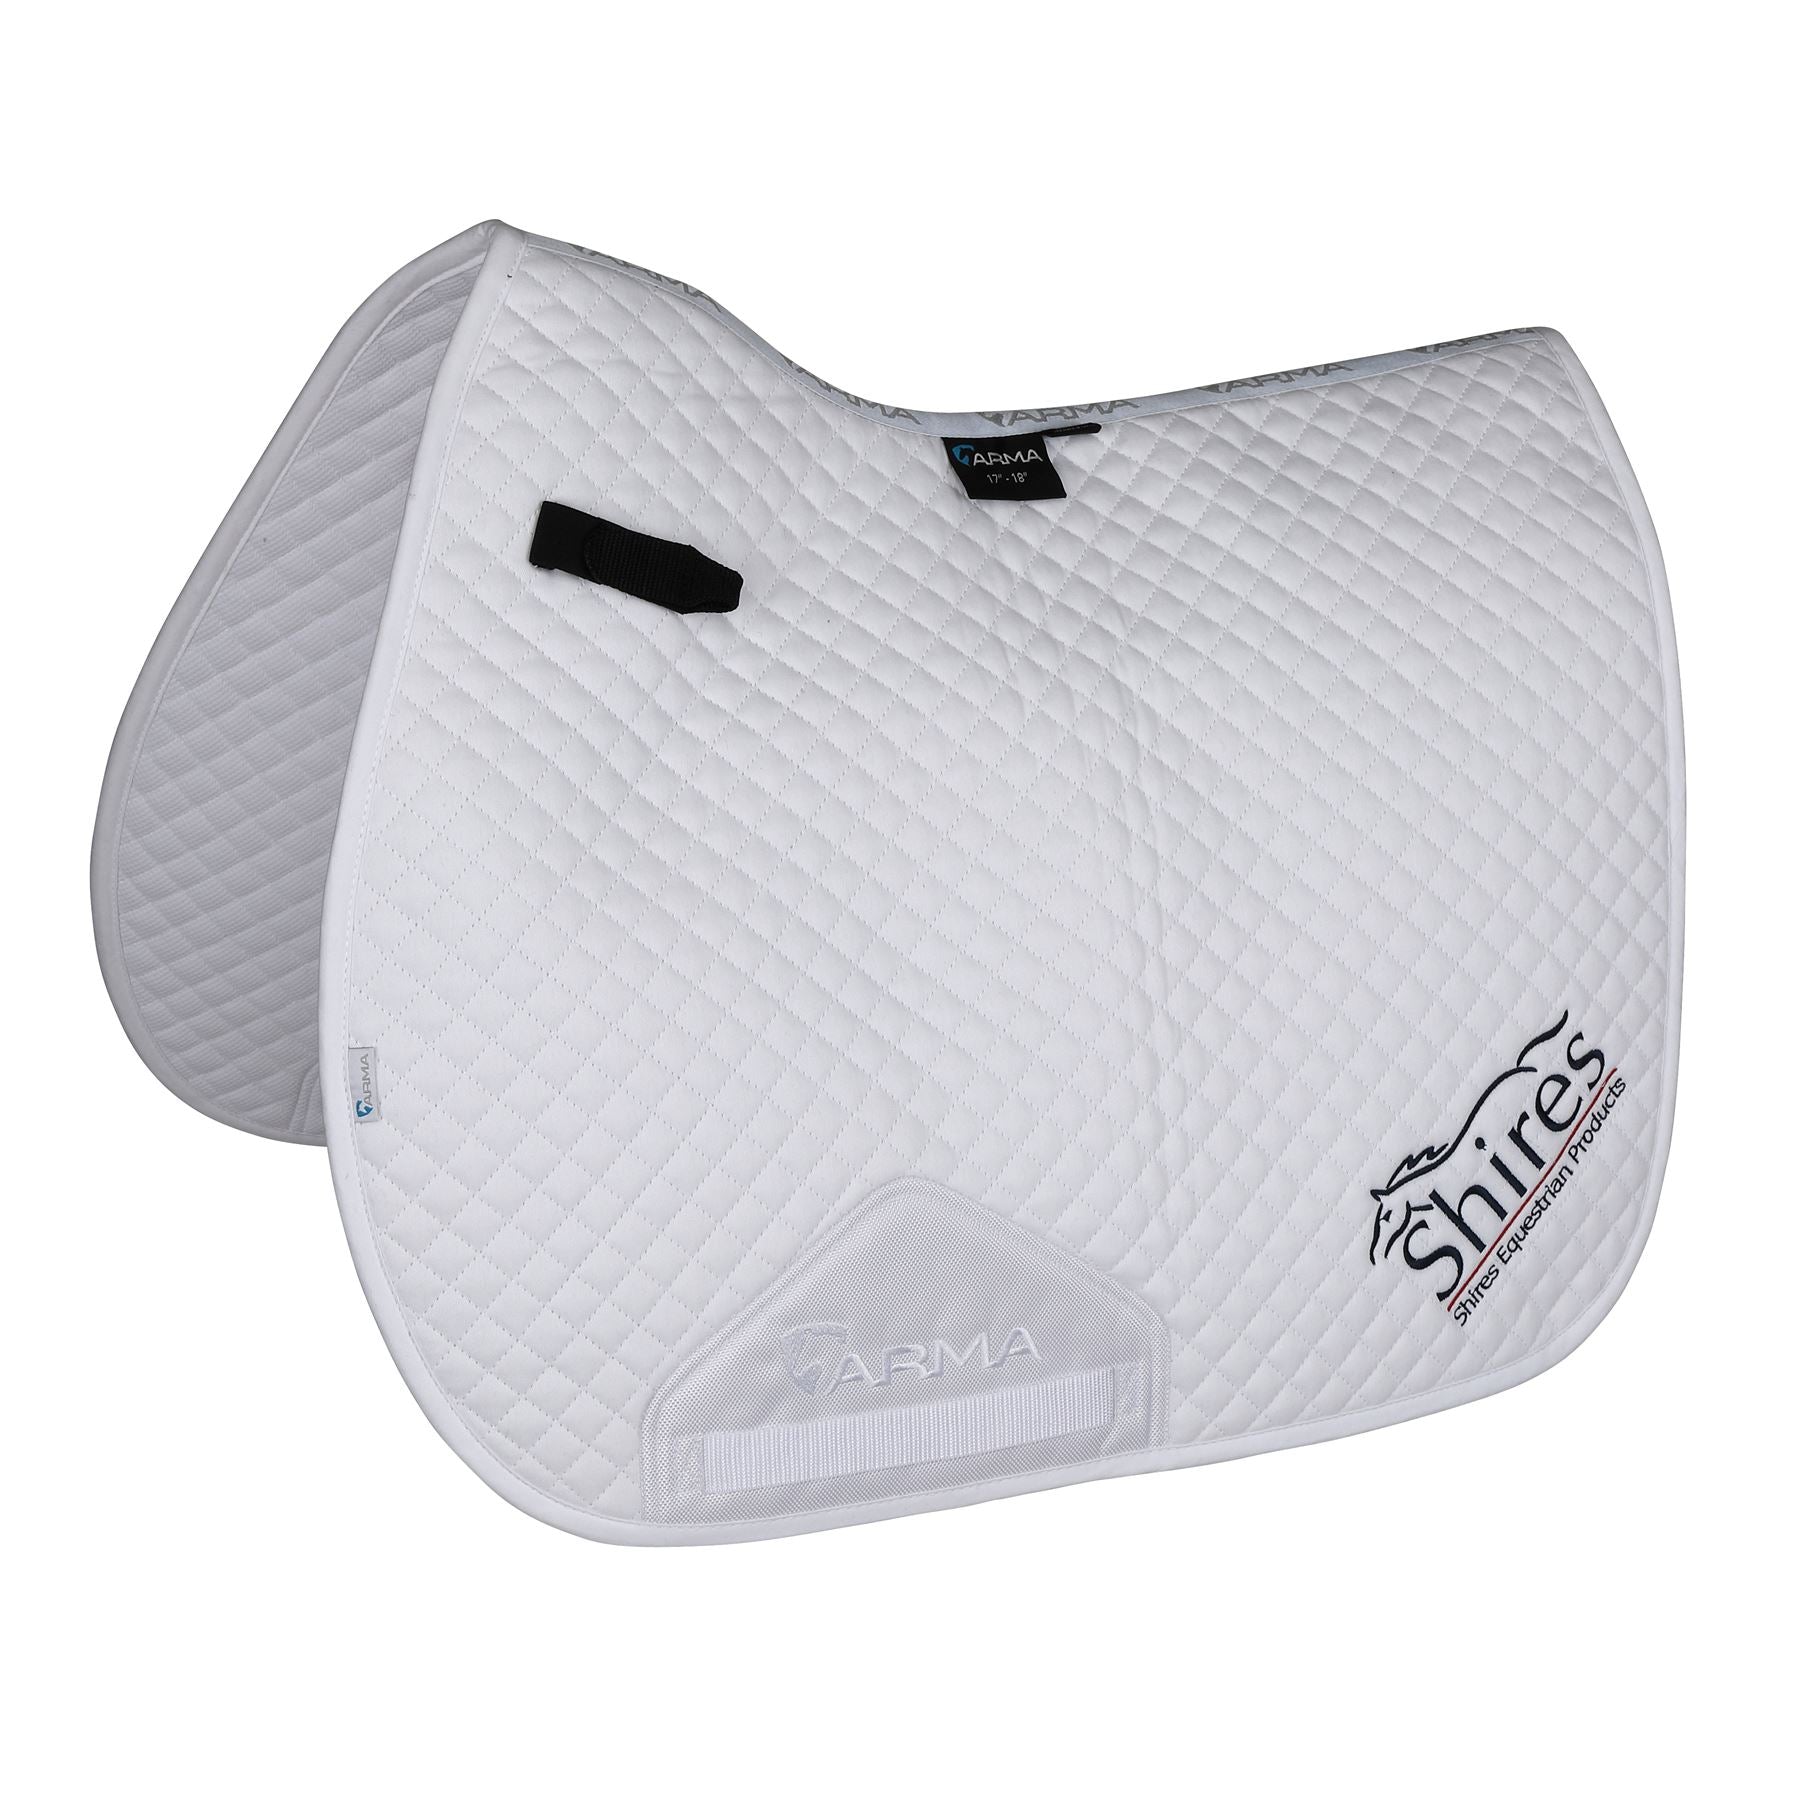 Shires Branded GP Saddlecloth - Just Horse Riders